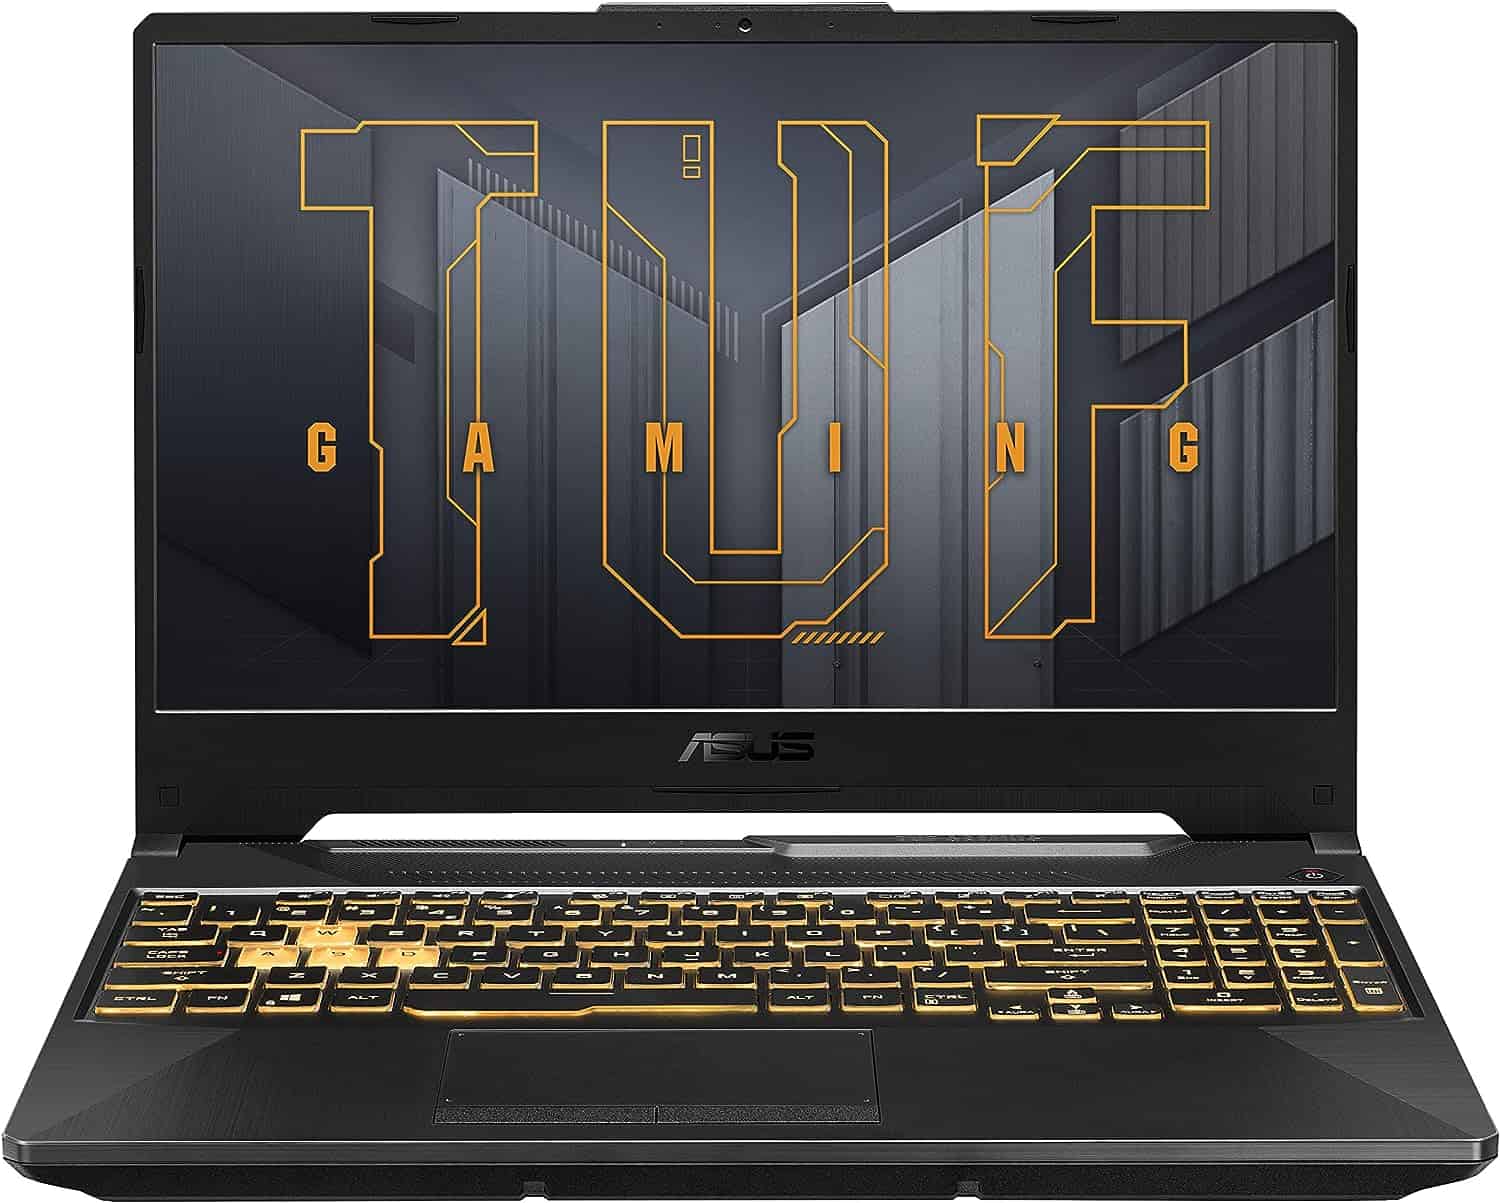 The ASUS TUF Gaming F15 laptop has a gold logo on it.